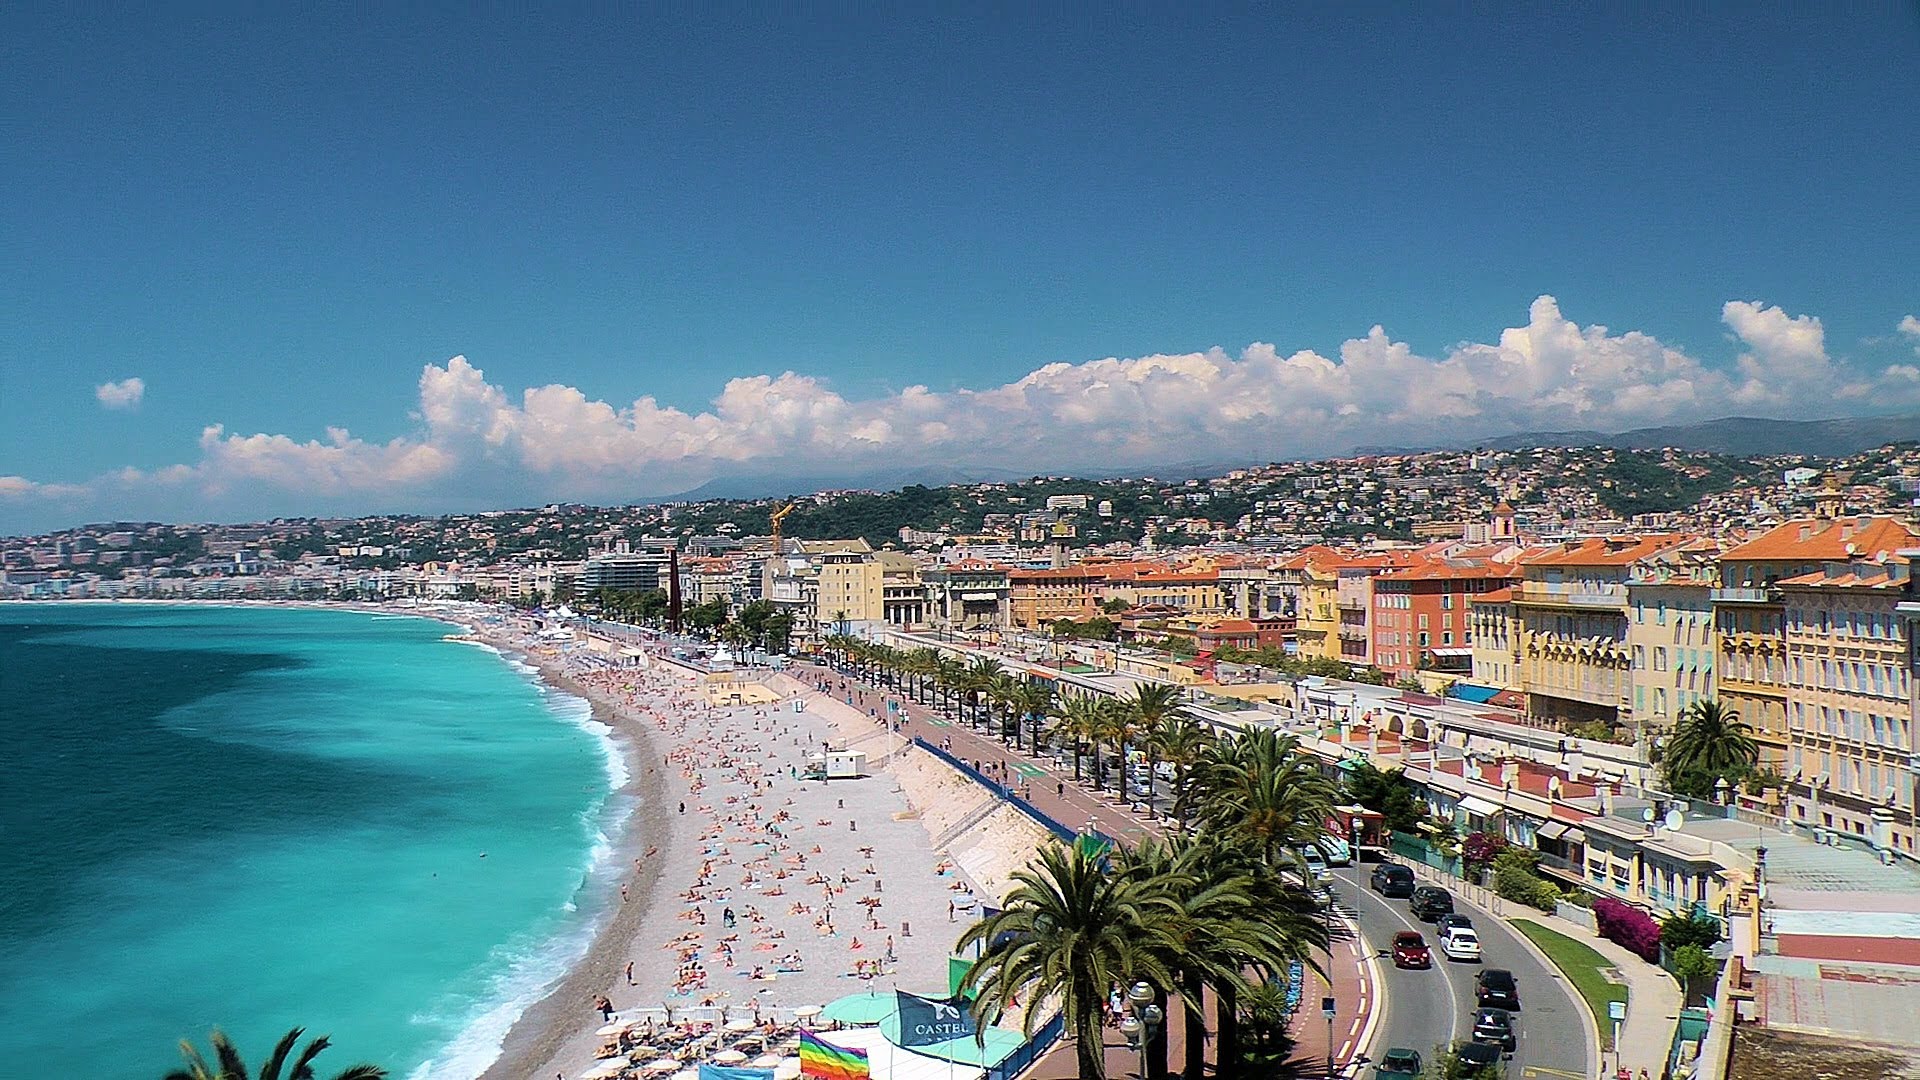 BJJ Winter Camp in Nice, France feat. Ze Radiola in October